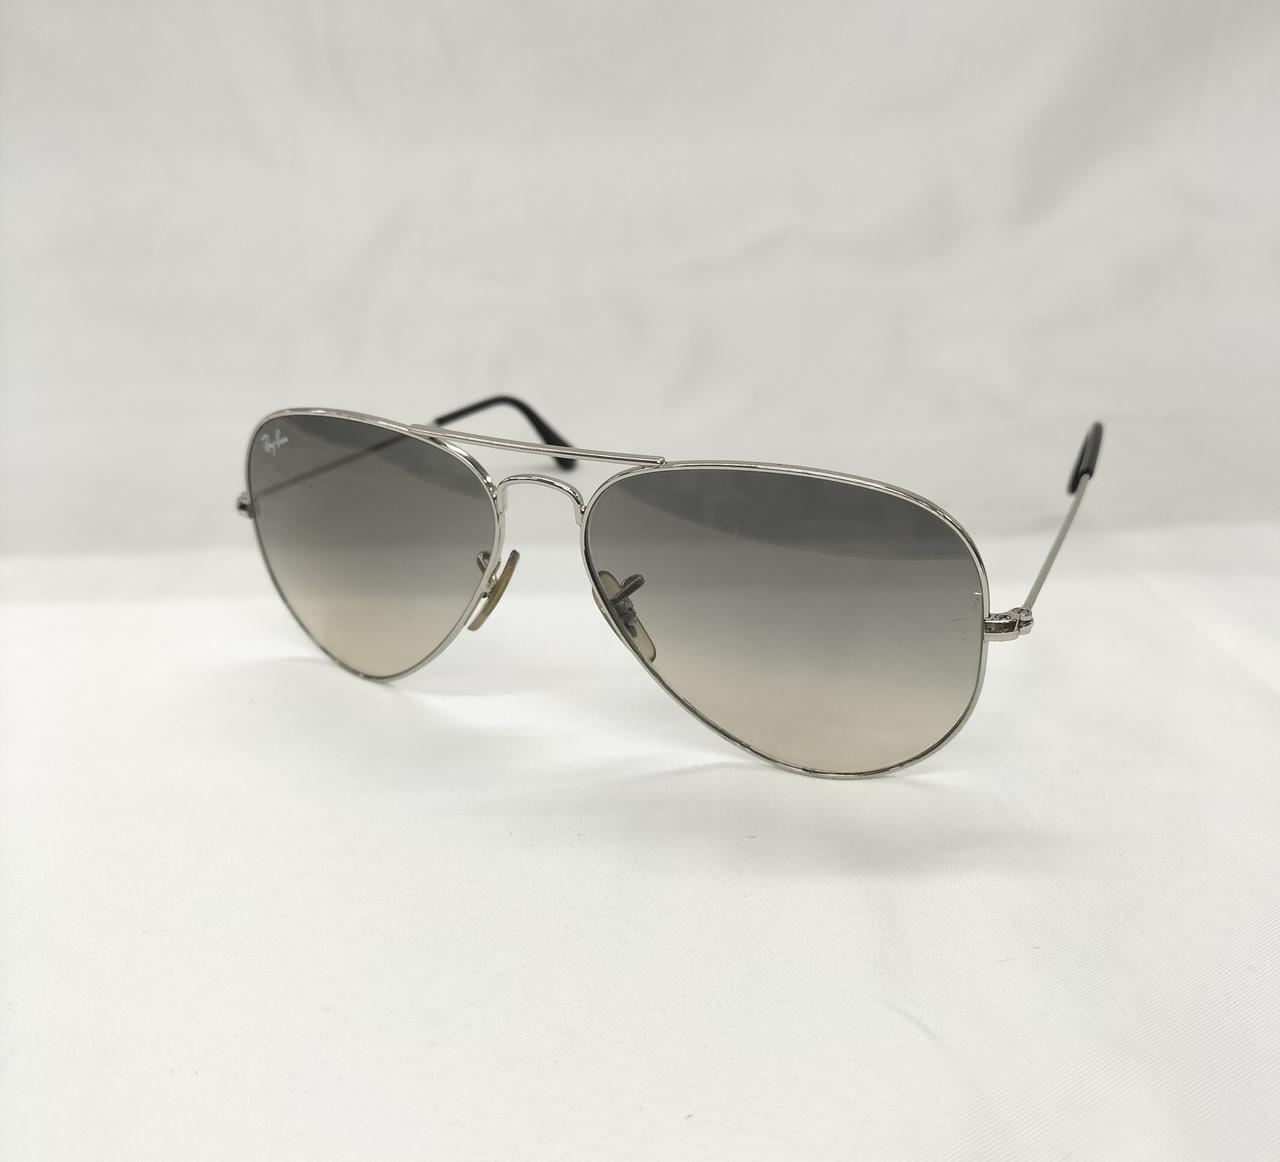 Ray Ban RB3025 Sunglasses From Japan